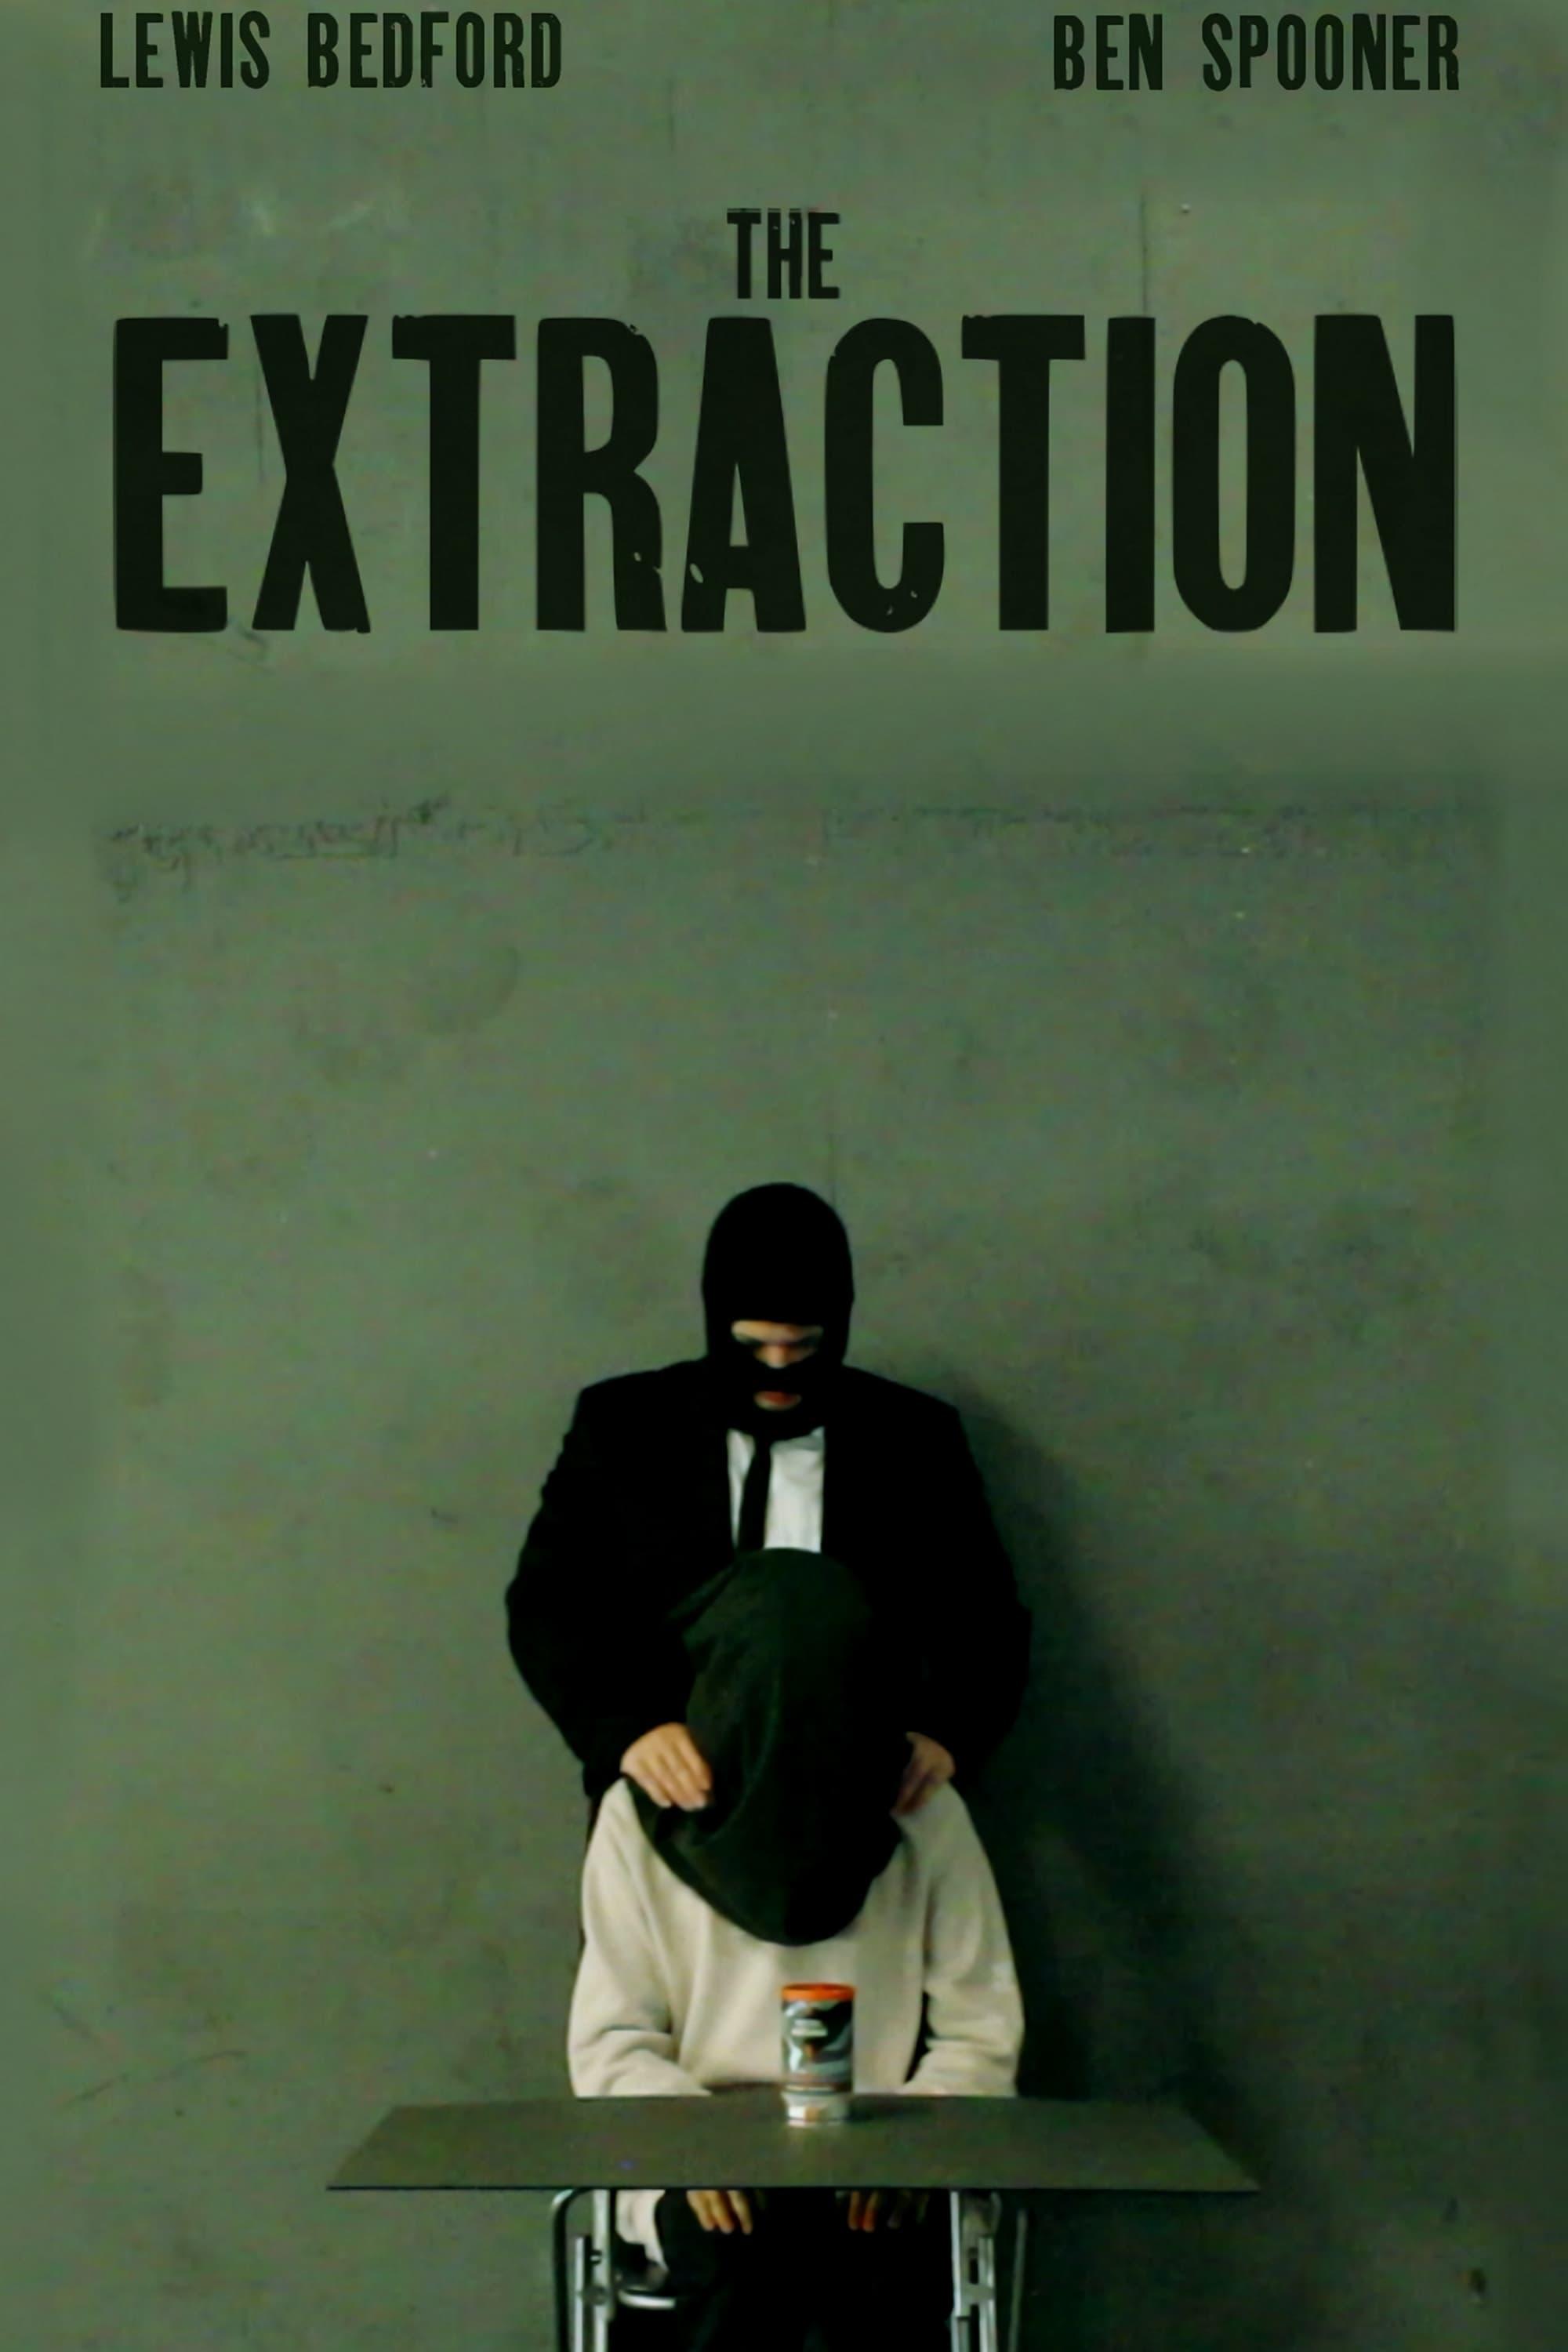 The Extraction poster